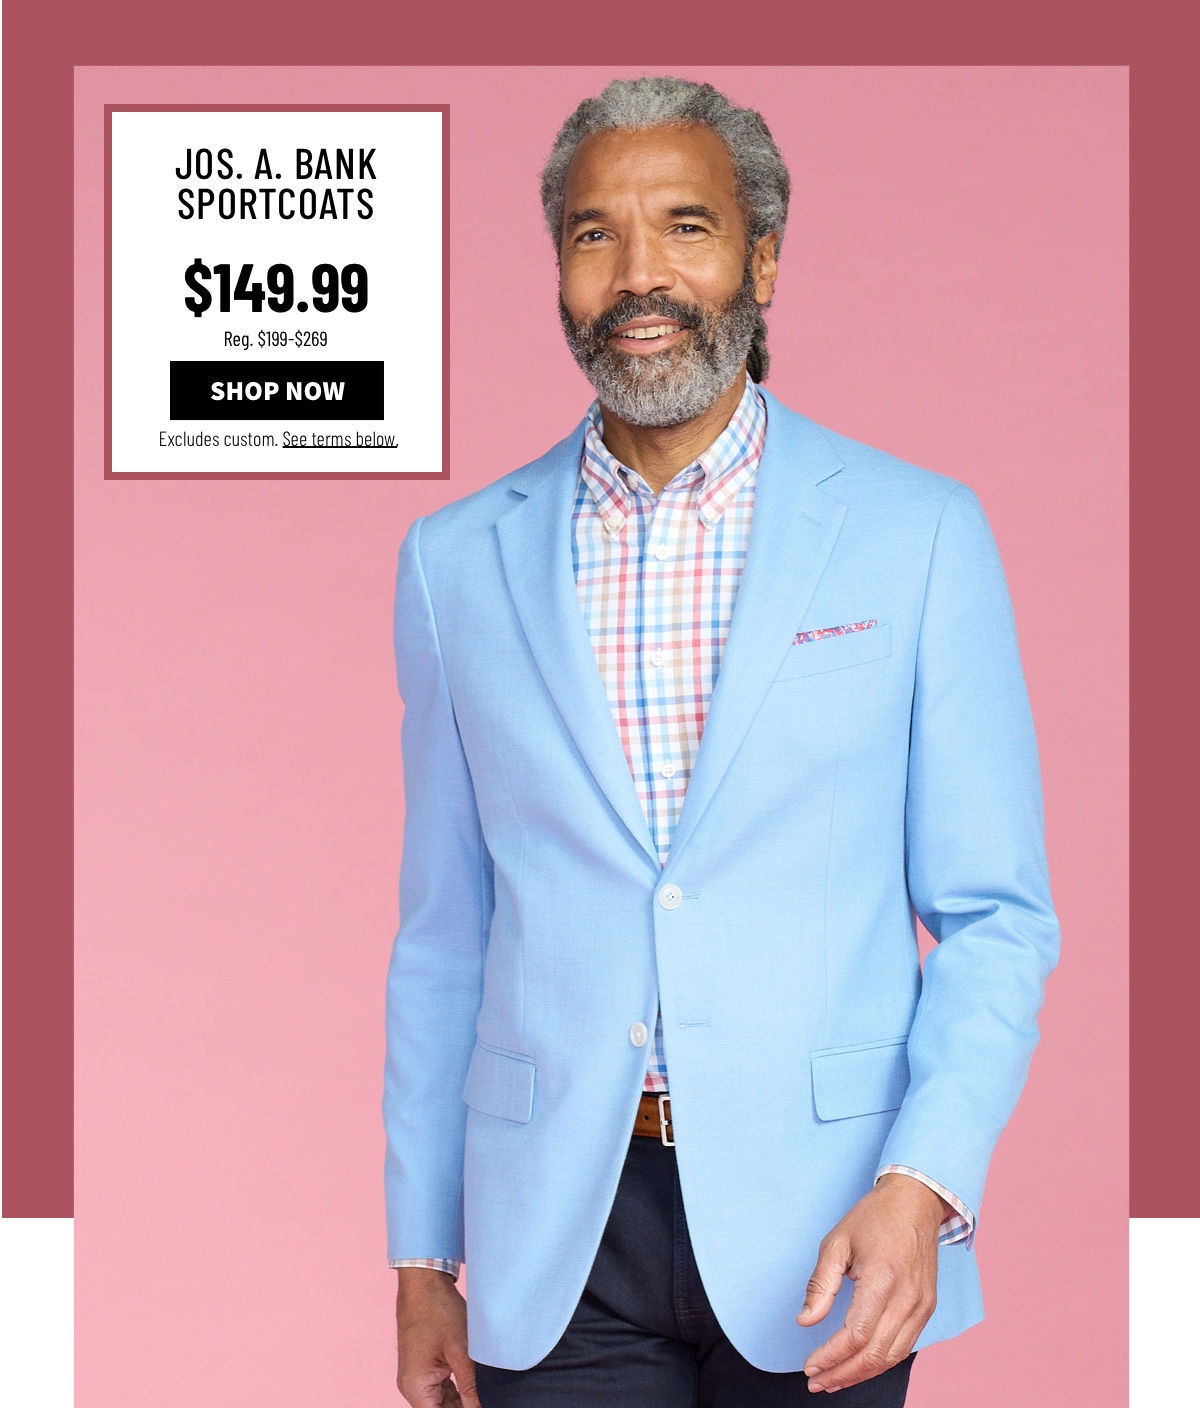 Jos. A. Bank Sportcoats $149.99 Reg. $199-$269 Shop Now Excludes custom. See terms below.